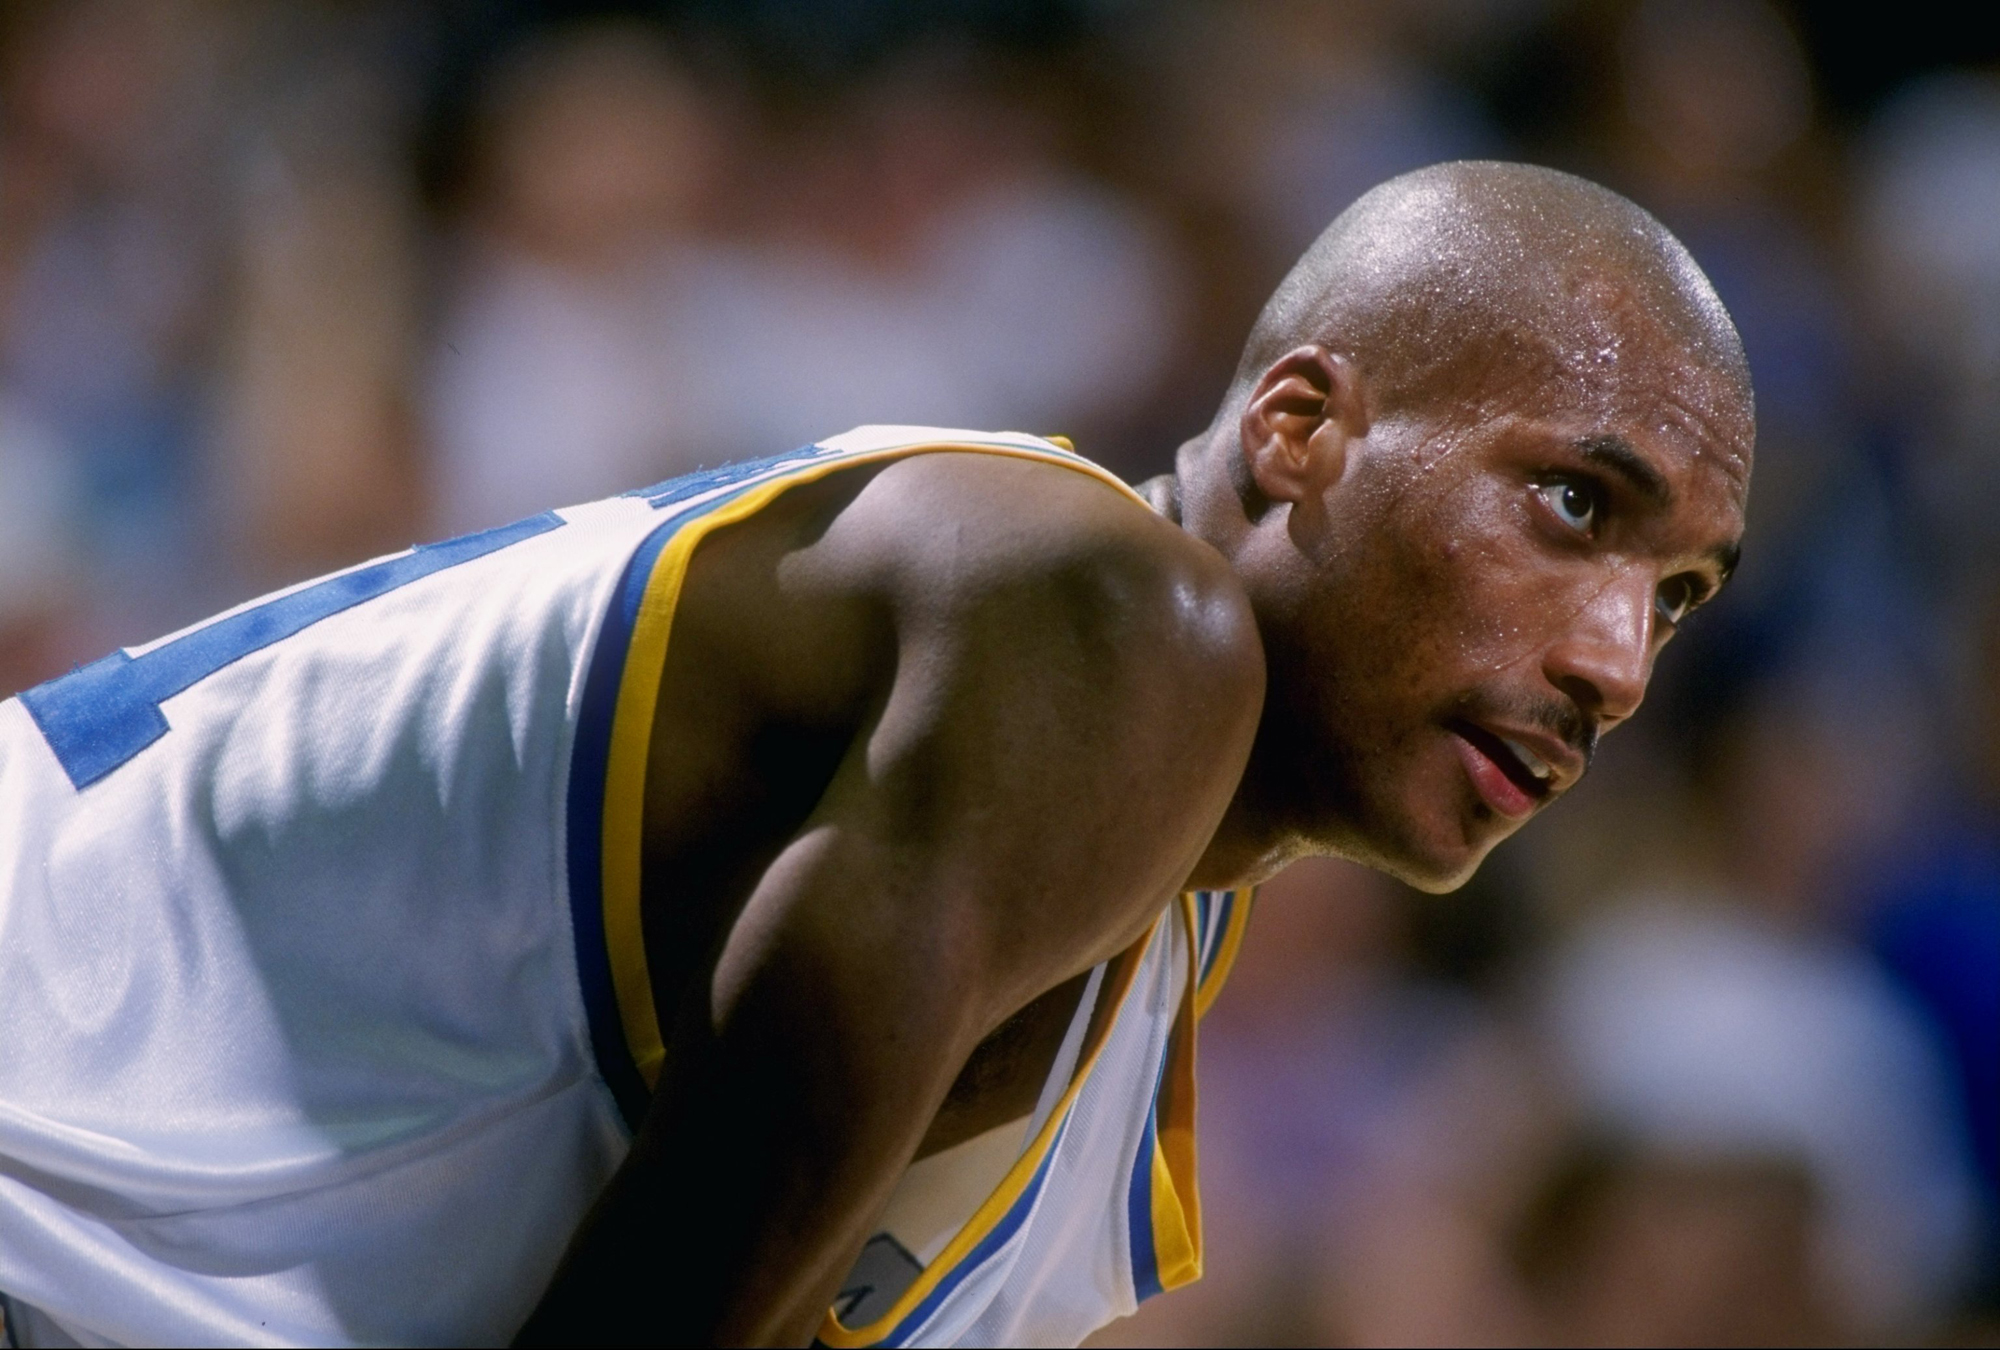 Ed O'Bannon playing for the UCLA Bruins in 1995. O’Bannon, along with a few other players, is suing for players to have control over the use of their likenesses, which earn millions of dollars for the NCAA. (J.D. Cuban—Getty Images)